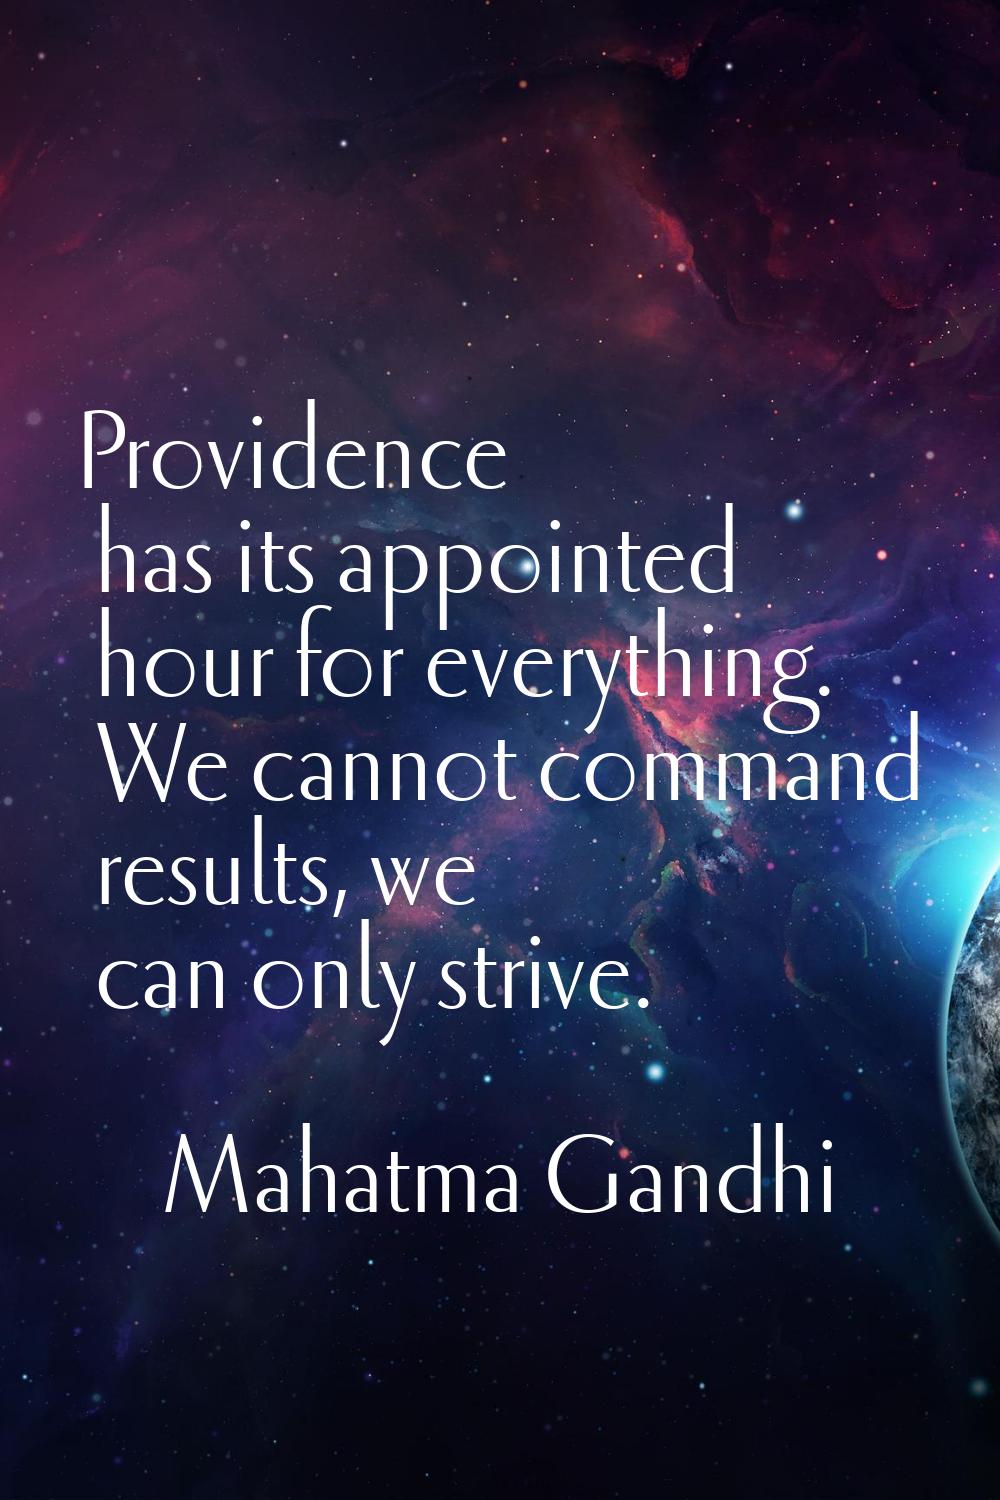 Providence has its appointed hour for everything. We cannot command results, we can only strive.